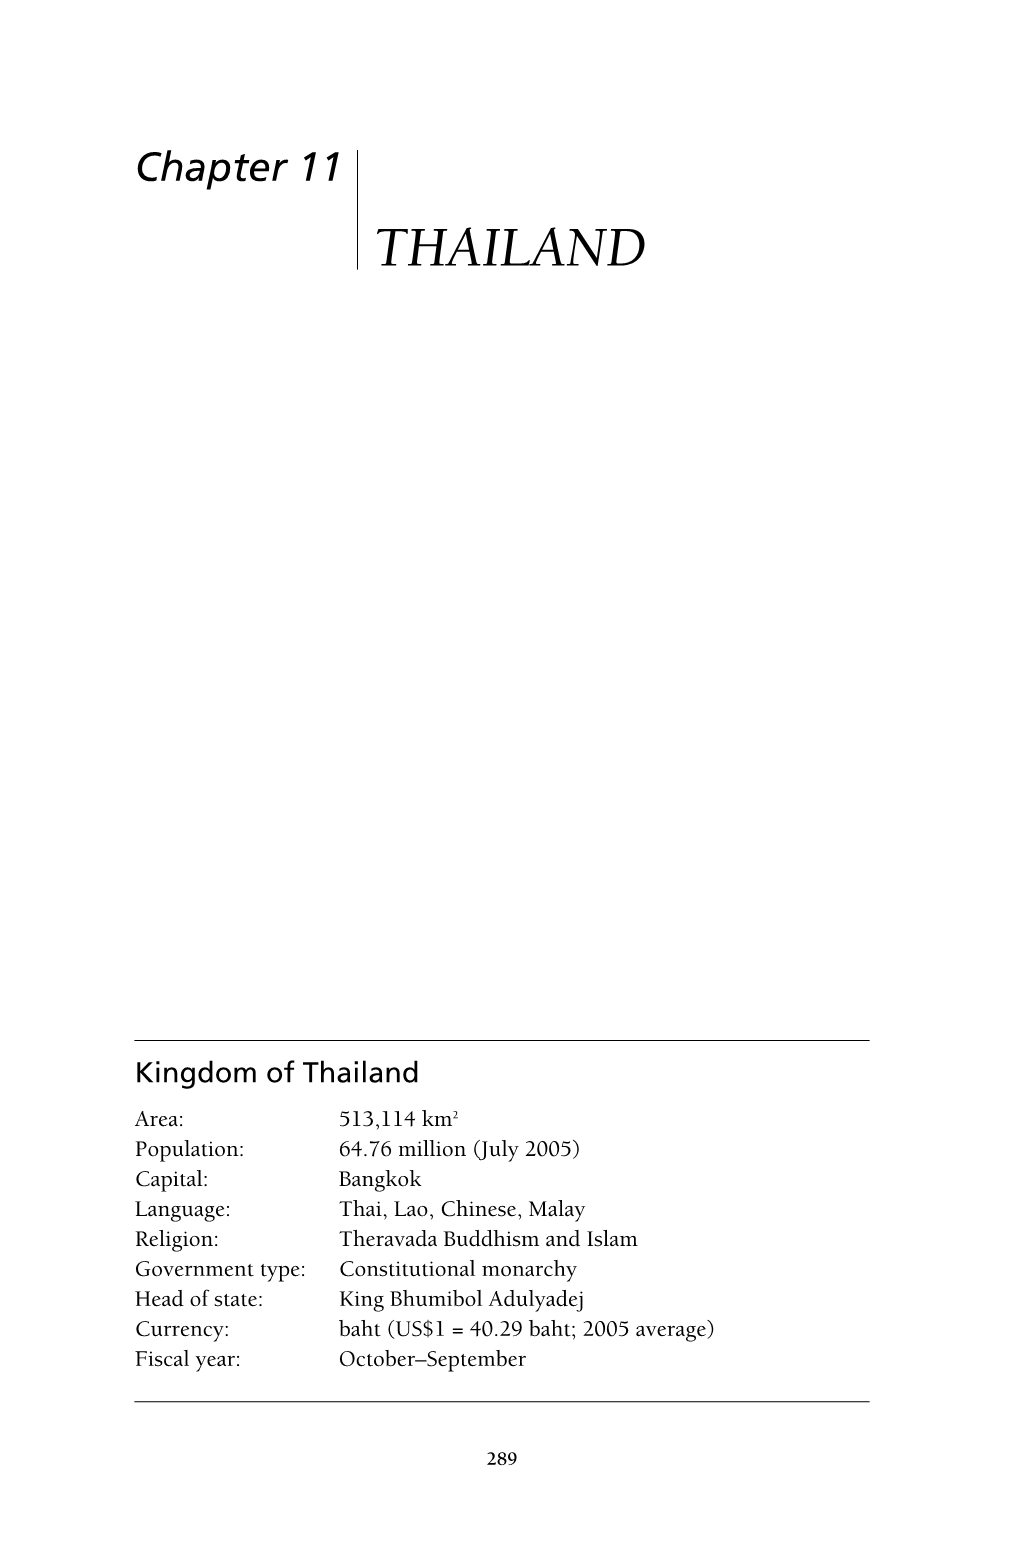 Chapter 11-Thailand the Second Thaksin Administration